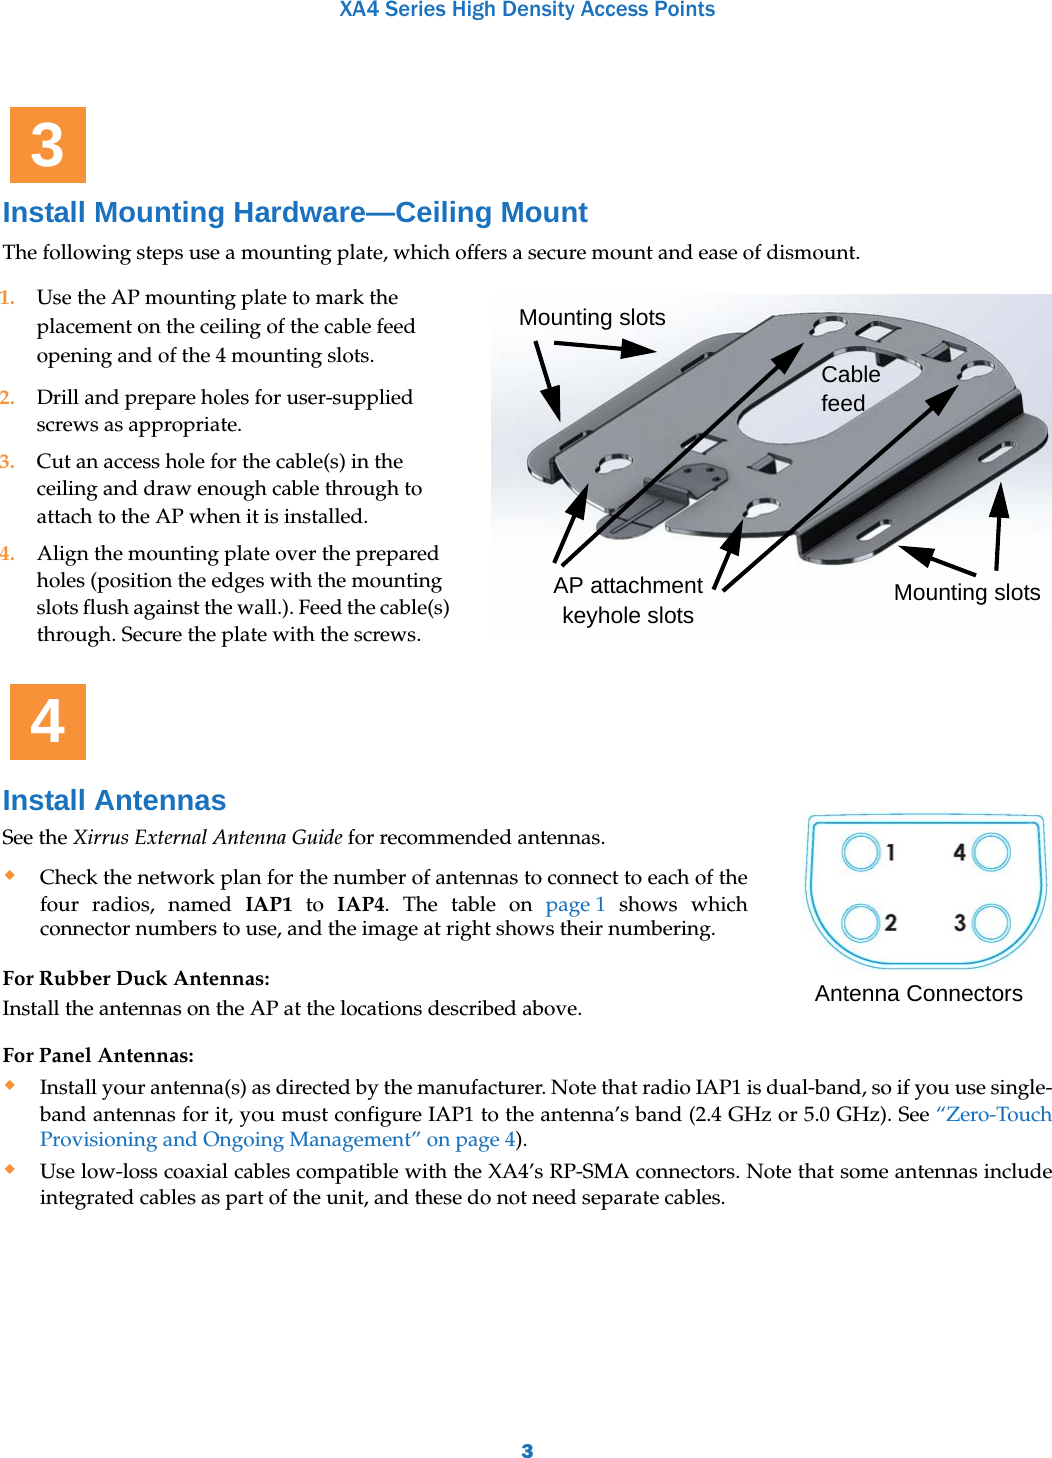 XA4 Series High Density Access Points3Install Mounting Hardware—Ceiling MountThe following steps use a mounting plate, which offers a secure mount and ease of dismount. For Panel Antennas:Install your antenna(s) as directed by the manufacturer. Note that radio IAP1 is dual-band, so if you use single-band antennas for it, you must configure IAP1 to the antenna’s band (2.4 GHz or 5.0 GHz). See “Zero-Touch Provisioning and Ongoing Management” on page 4). Use low-loss coaxial cables compatible with the XA4’s RP-SMA connectors. Note that some antennas include integrated cables as part of the unit, and these do not need separate cables. 1. Use the AP mounting plate to mark the placement on the ceiling of the cable feed opening and of the 4 mounting slots. 2. Drill and prepare holes for user-supplied screws as appropriate.3. Cut an access hole for the cable(s) in the ceiling and draw enough cable through to attach to the AP when it is installed.4. Align the mounting plate over the prepared holes (position the edges with the mounting slots flush against the wall.). Feed the cable(s) through. Secure the plate with the screws. Install AntennasSee the Xirrus External Antenna Guide for recommended antennas. Check the network plan for the number of antennas to connect to each of the four radios, named IAP1 to IAP4. The table on page 1 shows which connector numbers to use, and the image at right shows their numbering.For Rubber Duck Antennas:Install the antennas on the AP at the locations described above.3Mounting slotsAP attachment keyhole slotsMounting slotsCable feed4Antenna Connectors